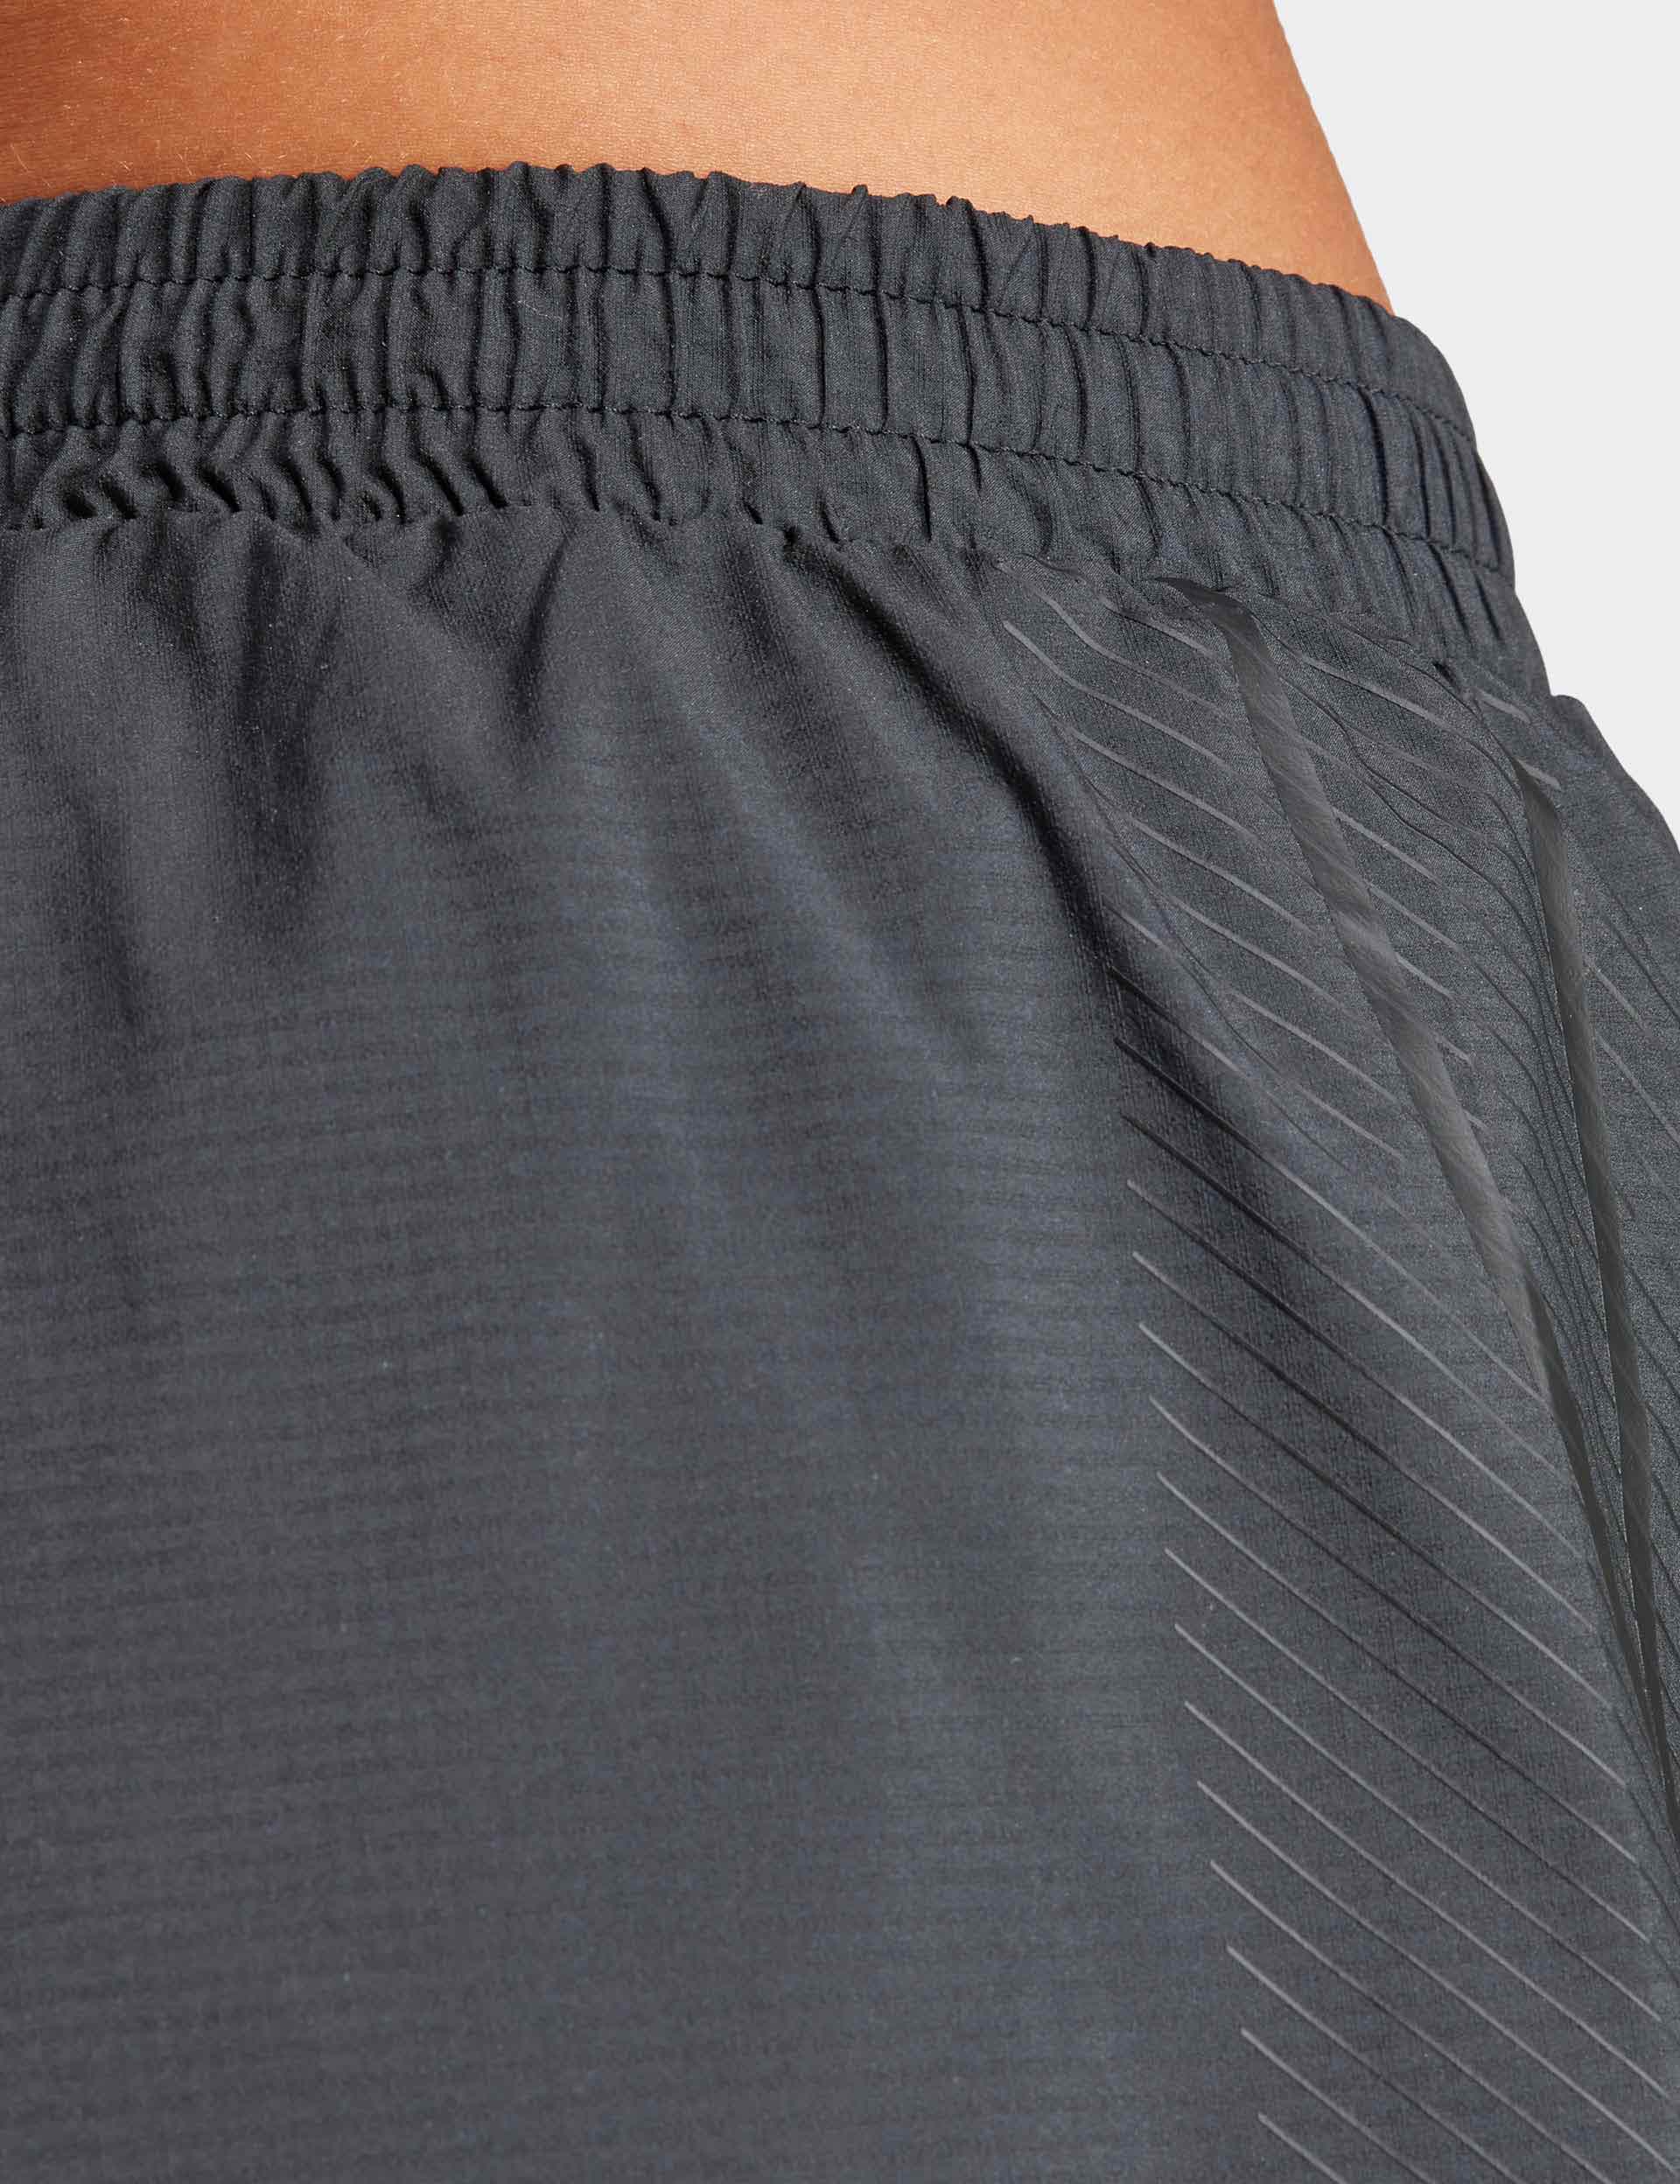 adidas Pacer Stretch-Woven Zipper Pocket Lux Shorts - Grey